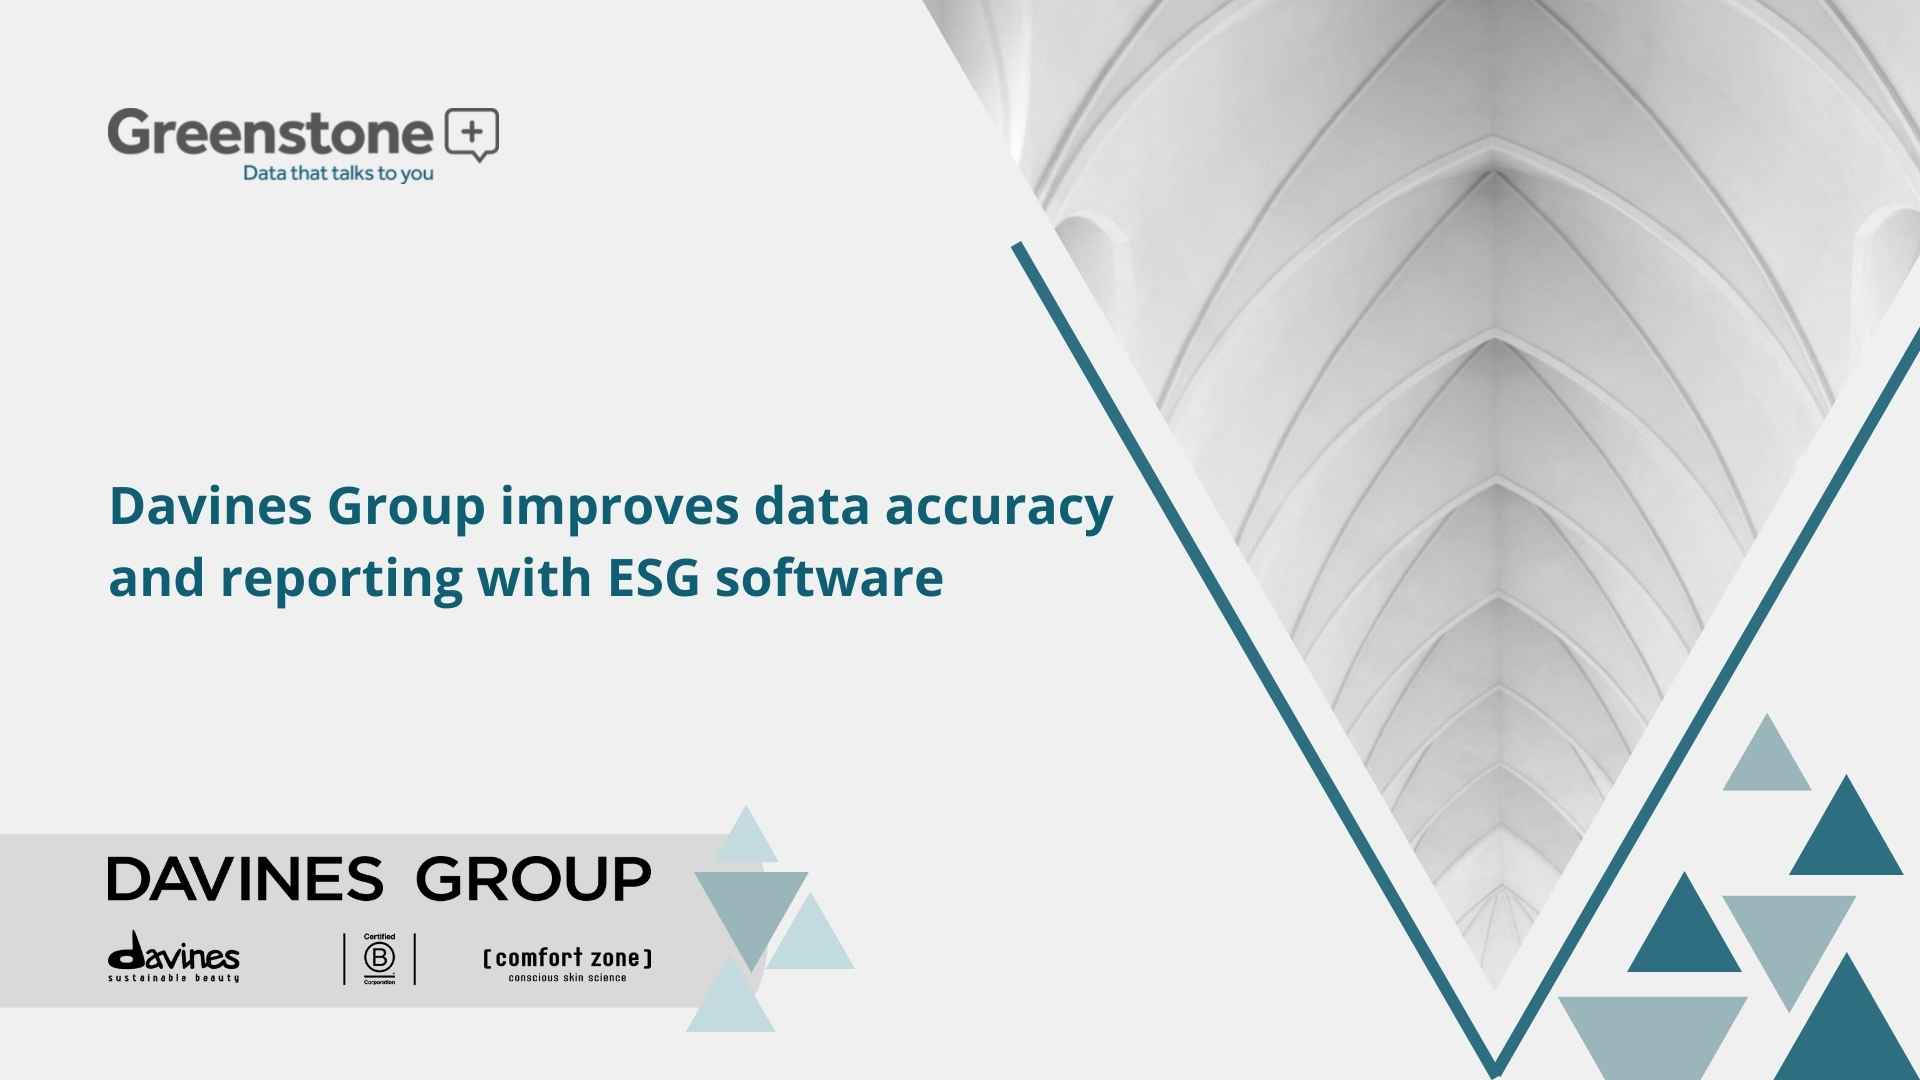 Davines Group improves data accuracy and reporting with ESG software